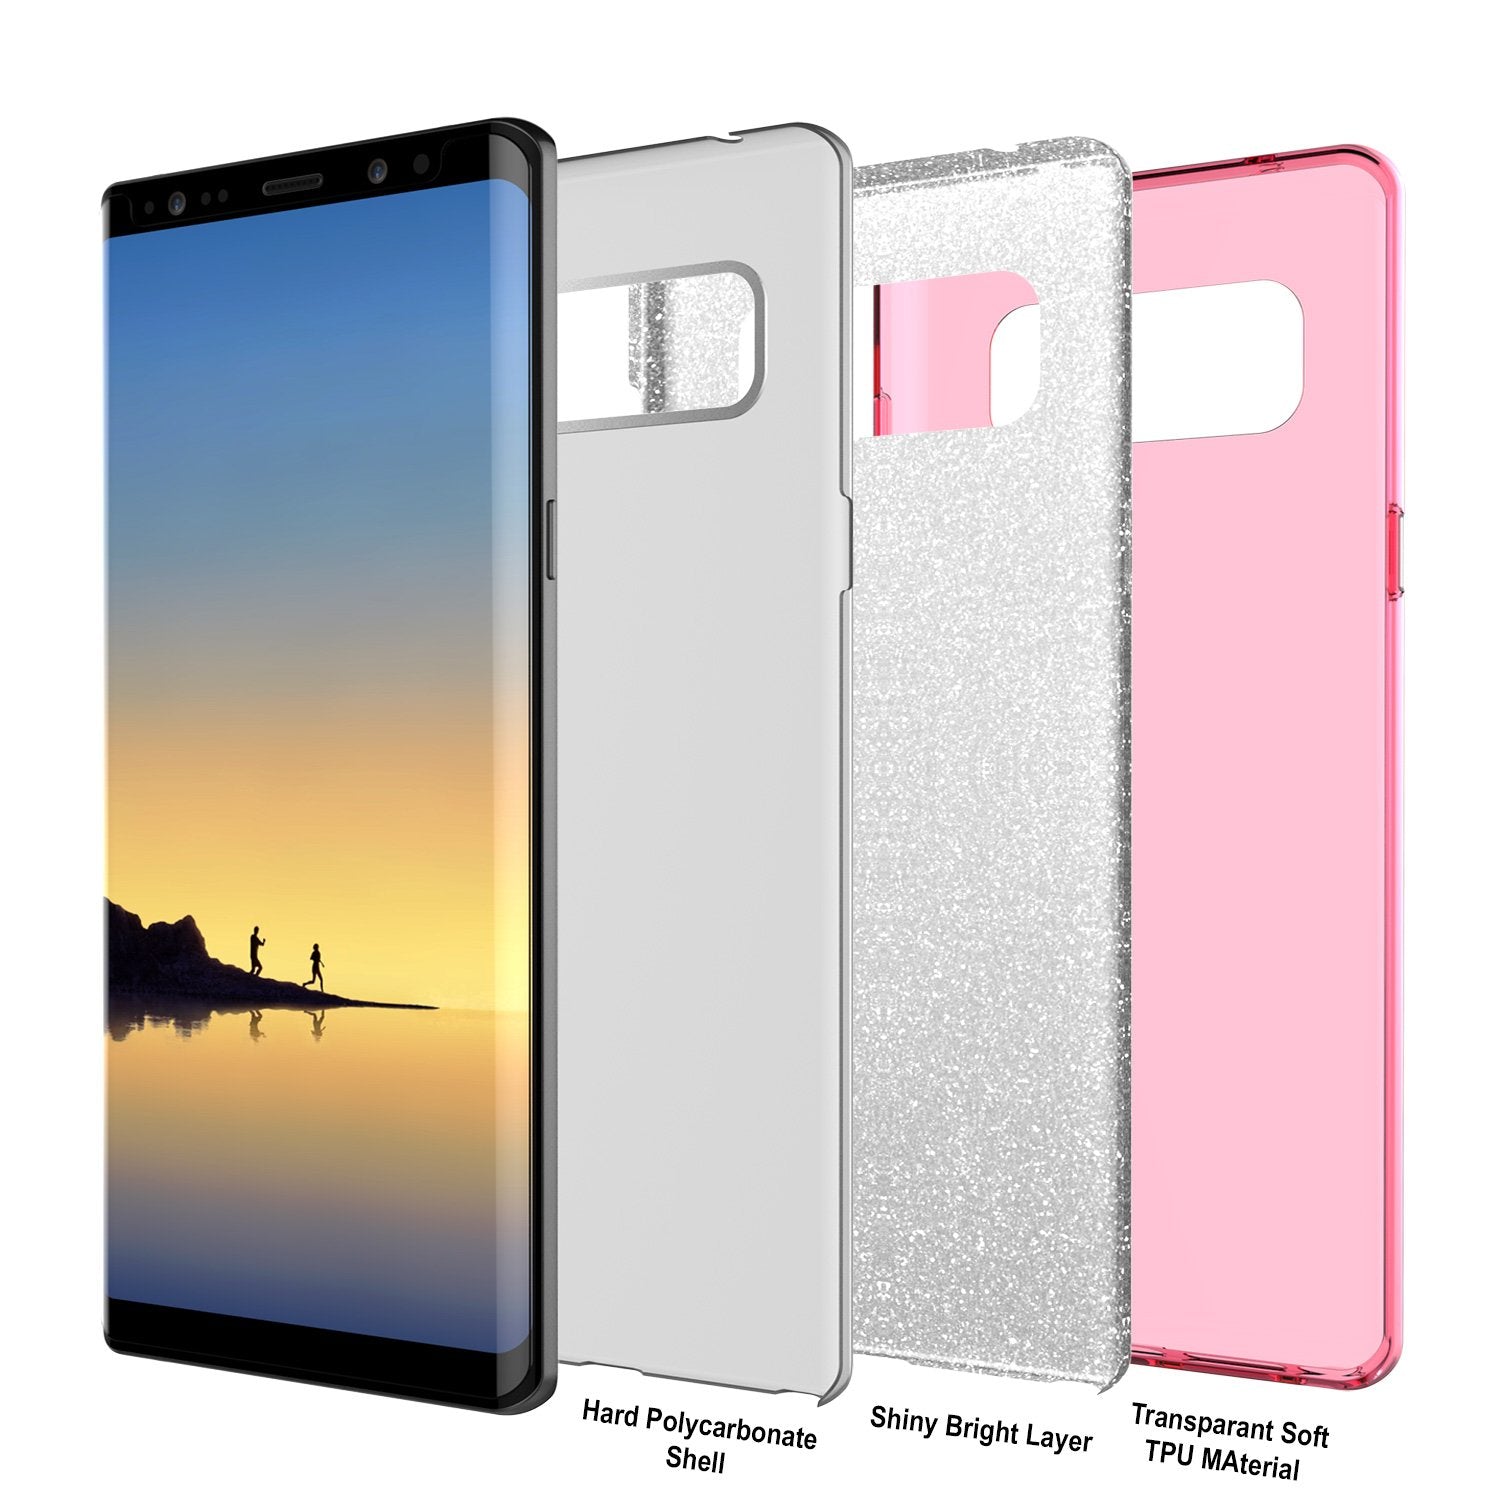 Galaxy Note 8 Ultra Slim Protective Punkcase Galactic Case [Pink]